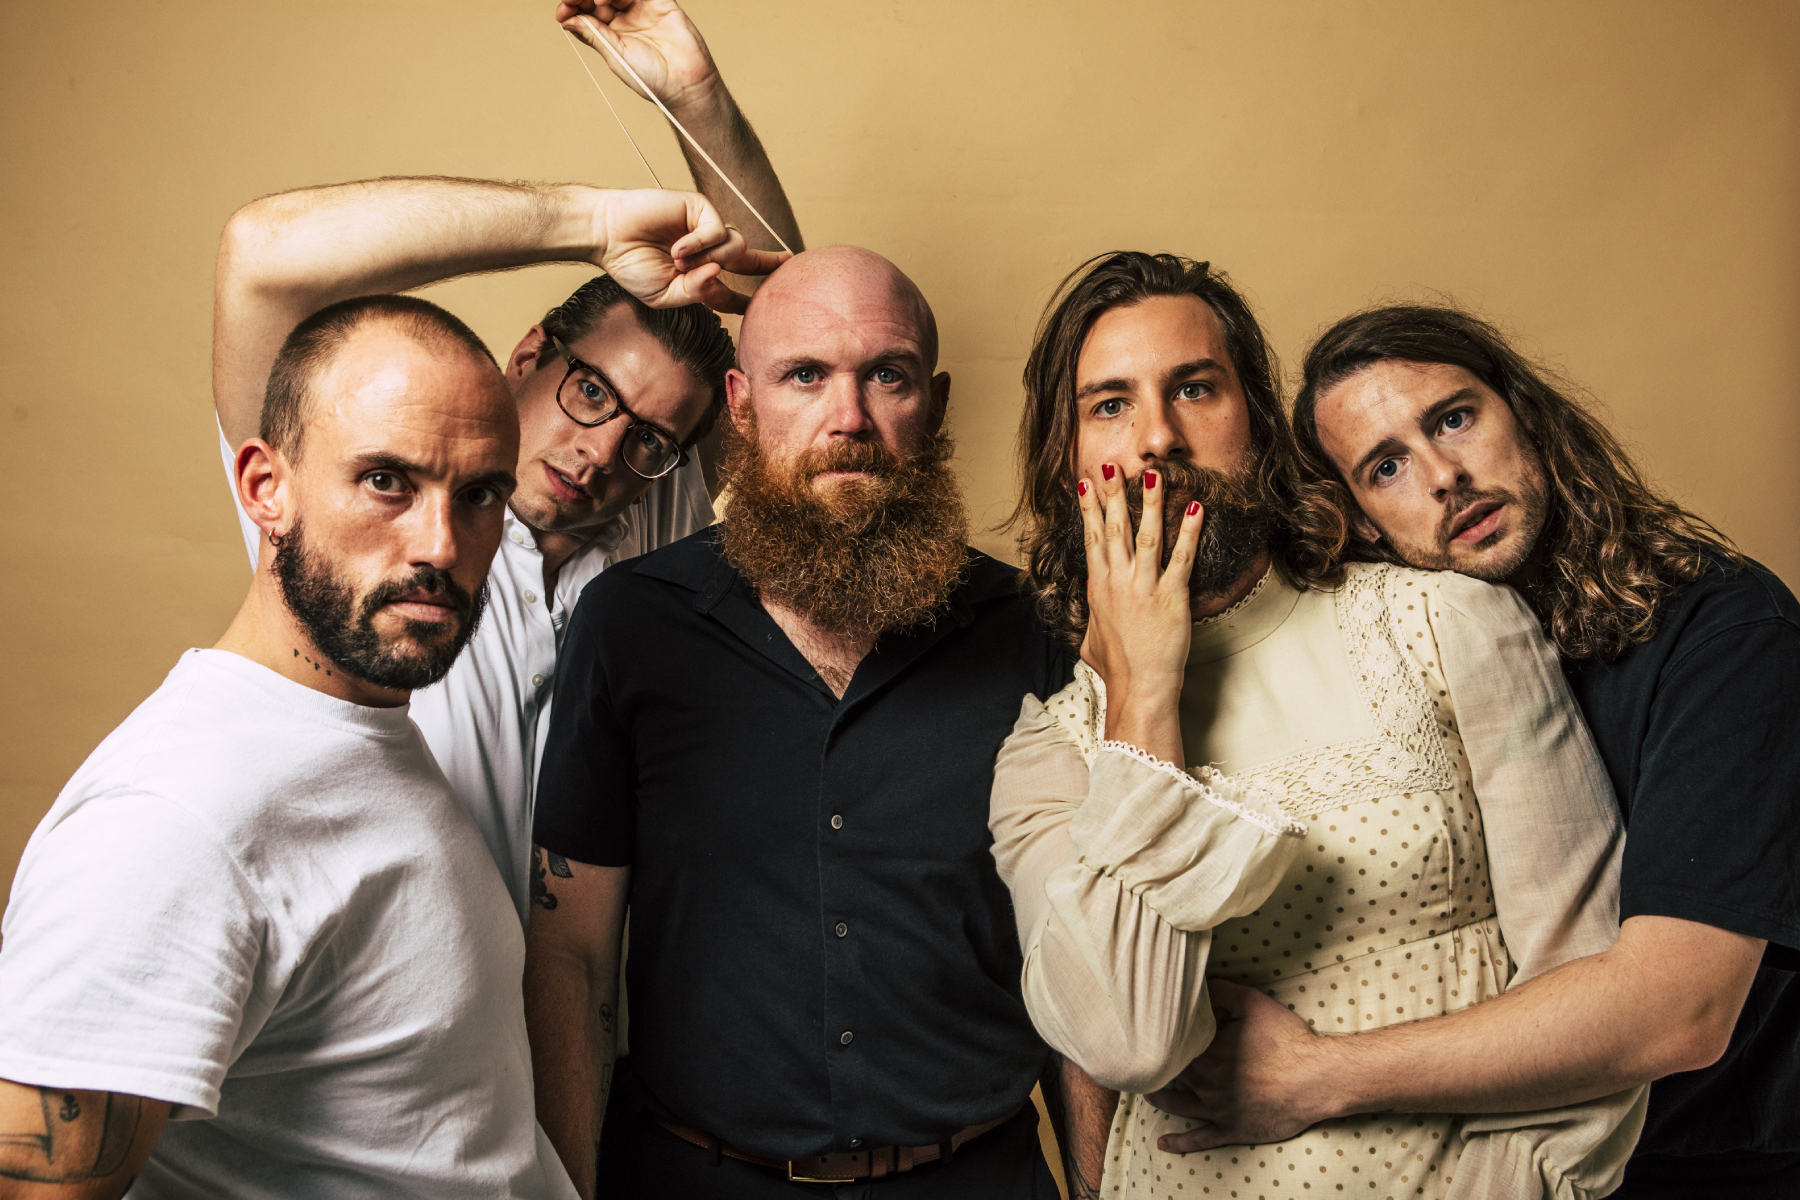 Idles Preview New Album With ‘The Beachland Ballroom’